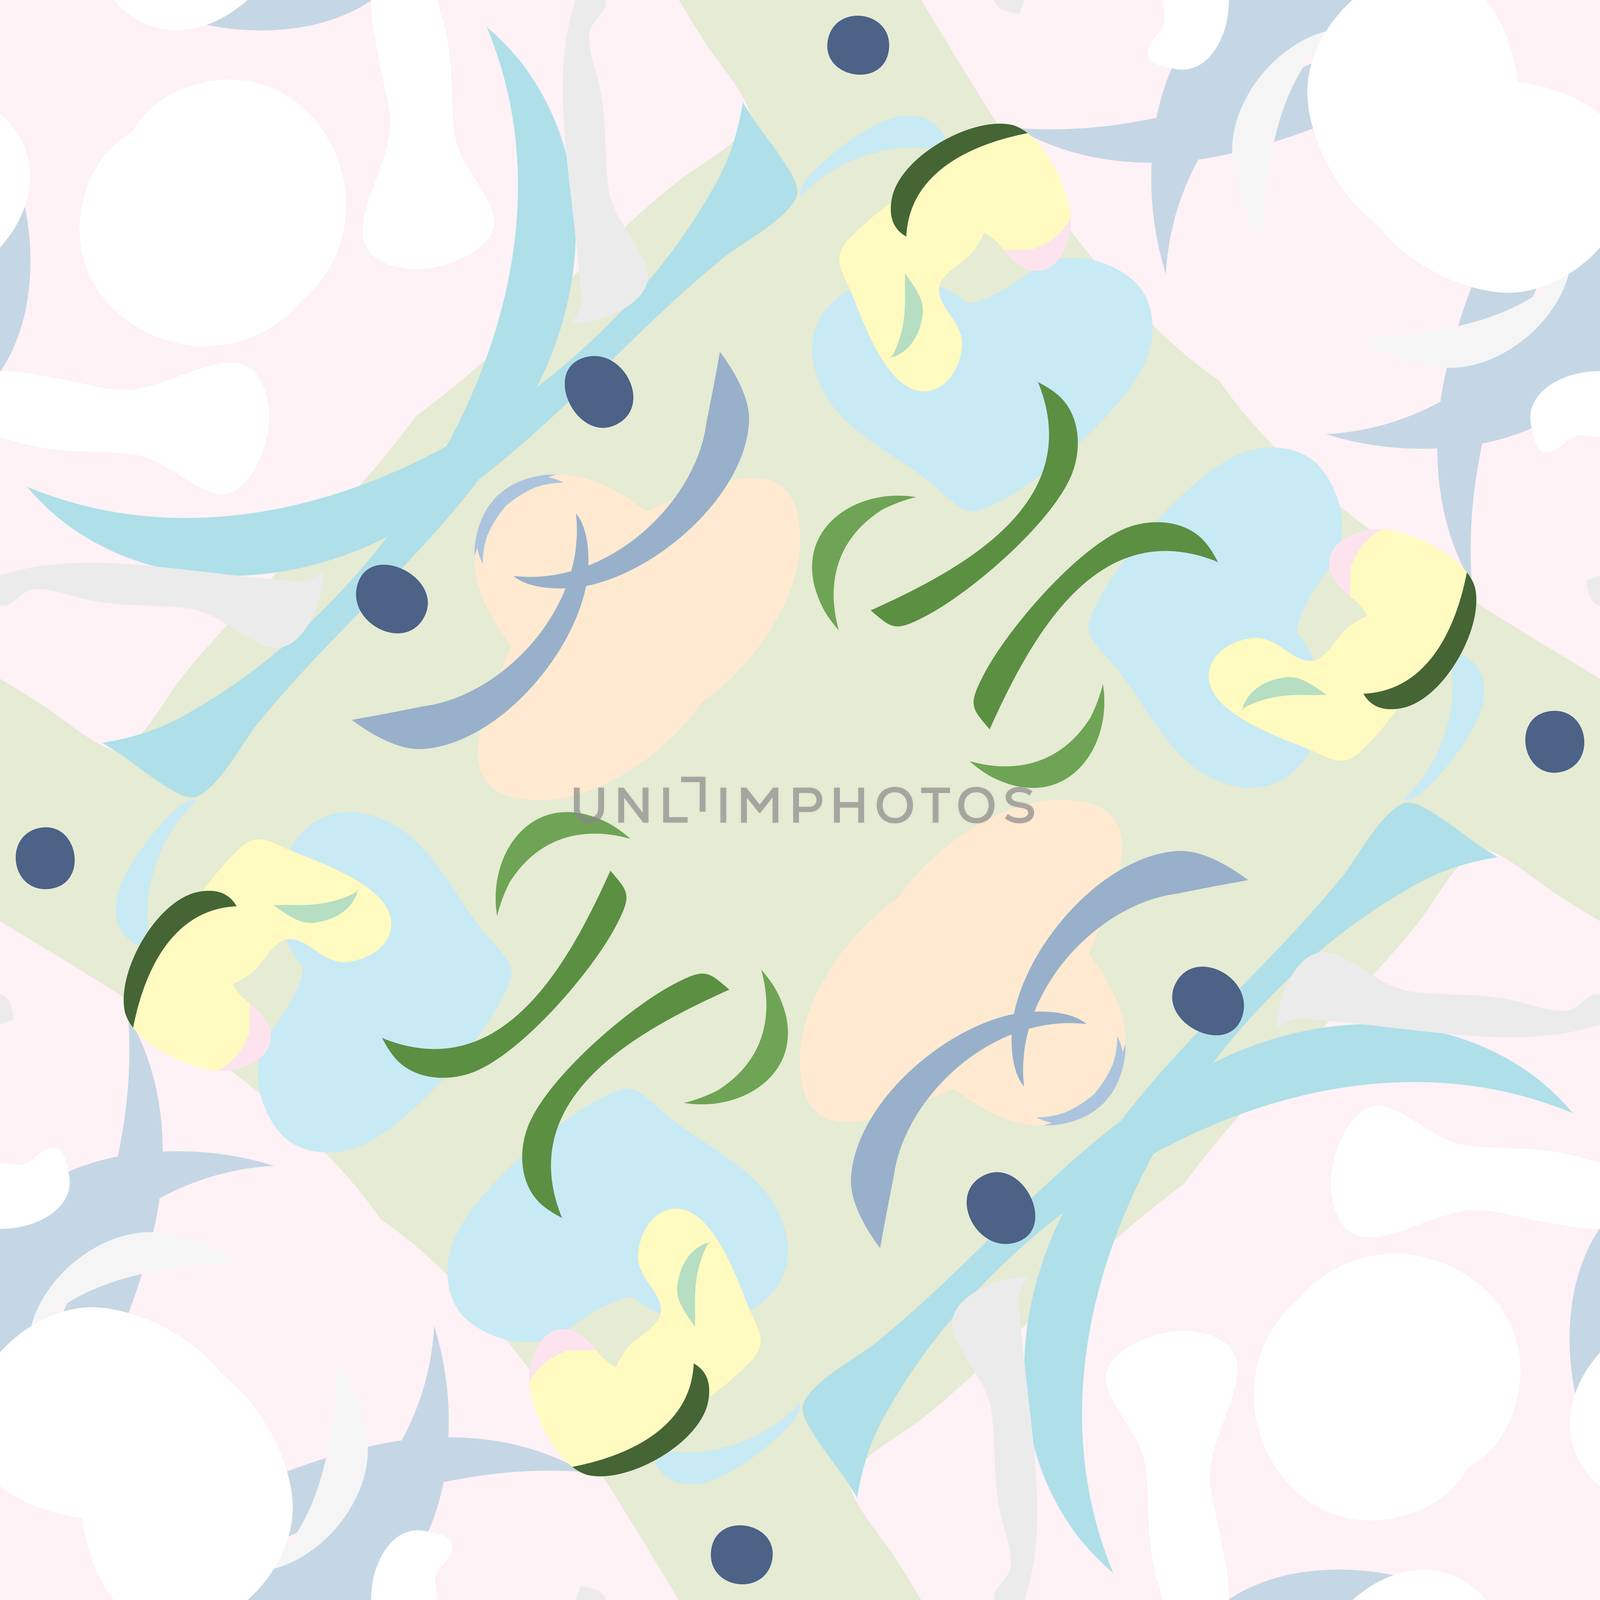 Repeating background pattern of blue and green shapes